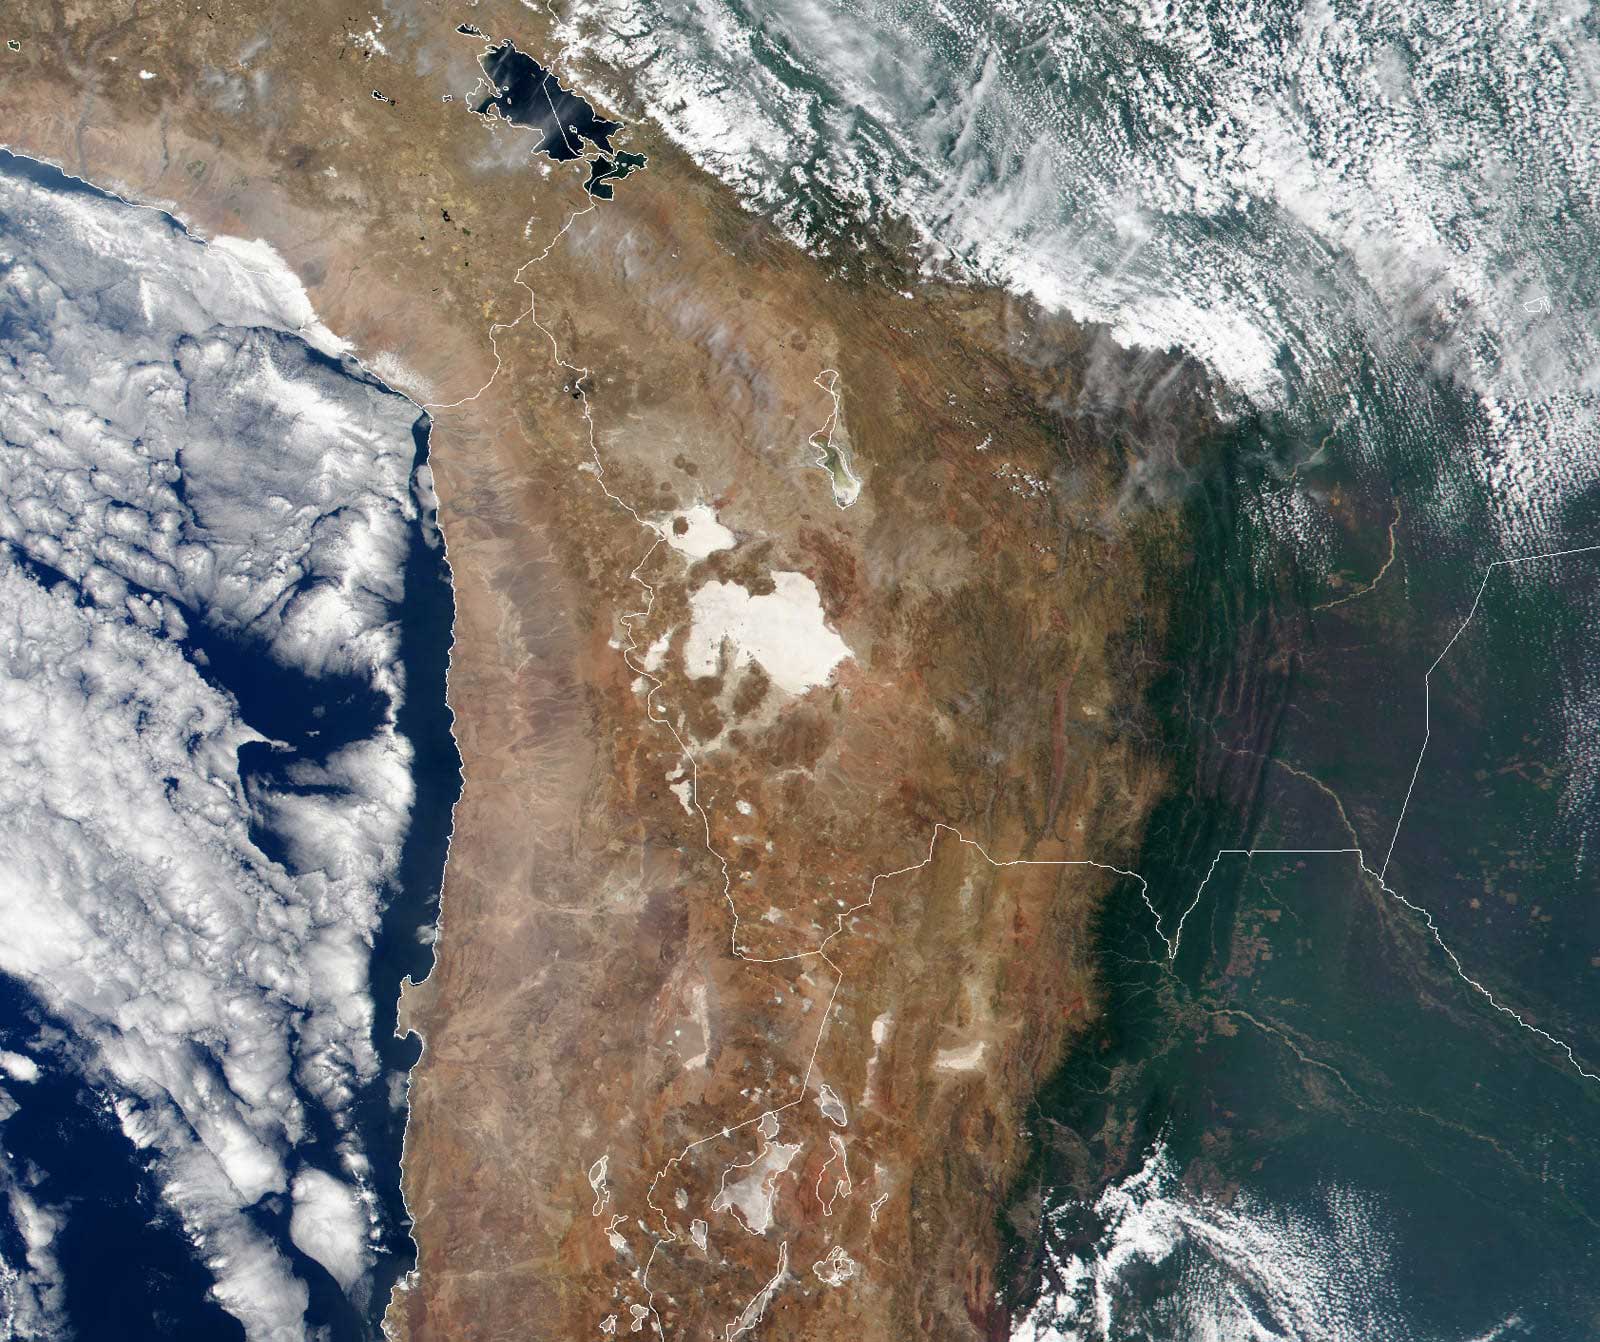 The central Andes Mountains and surrounding landscape, as seen in this true-color image from NASA’s Terra spacecraft, formed over the past 170 million years as the Nazca Plate lying under the Pacific Ocean has forced its way under the South American Plate. (Image courtesy of NASA)